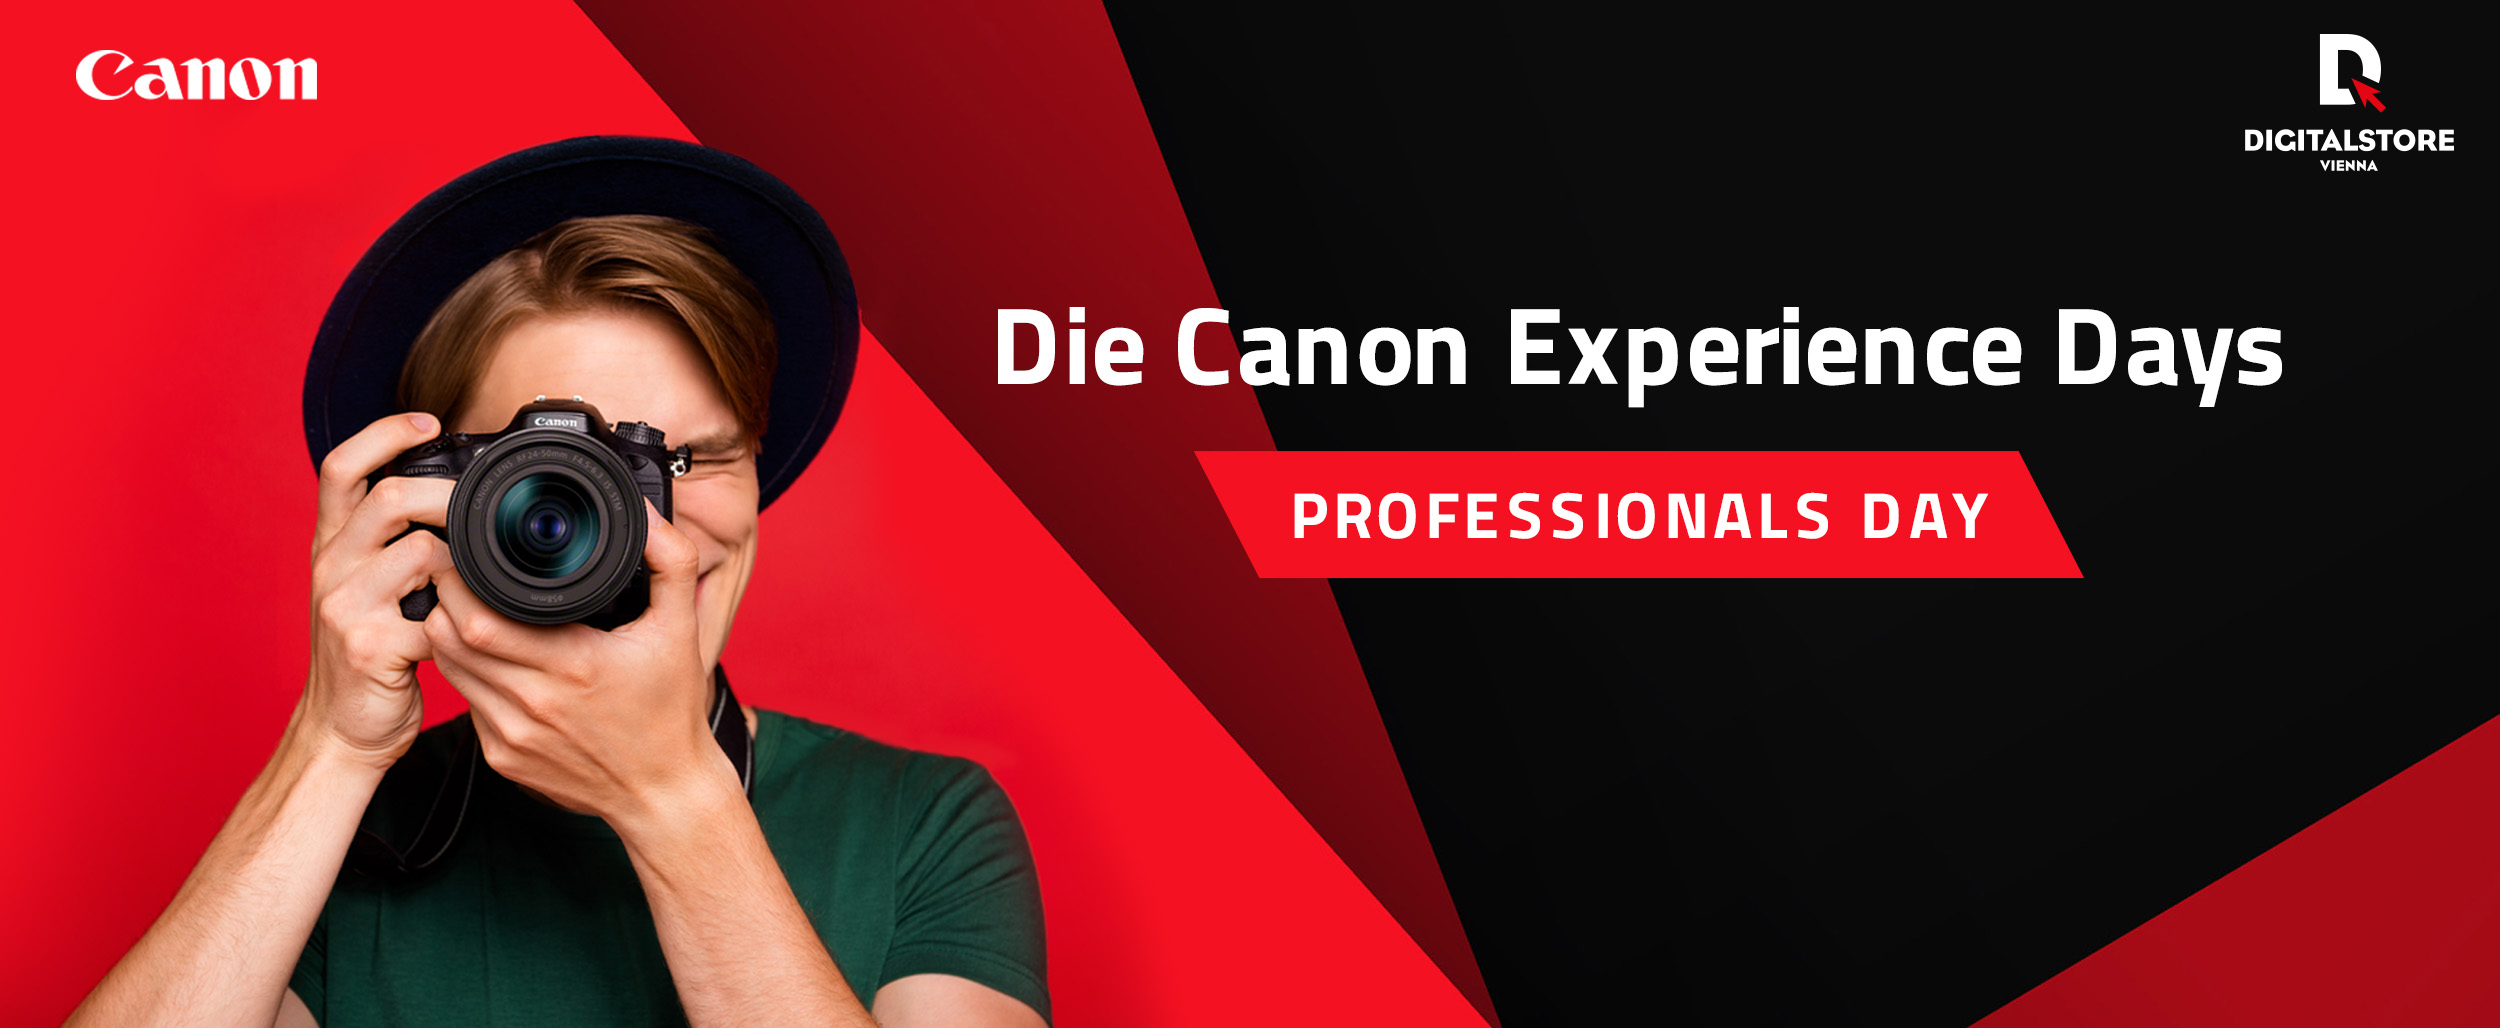 Canon Experience Days "Professionals Day"